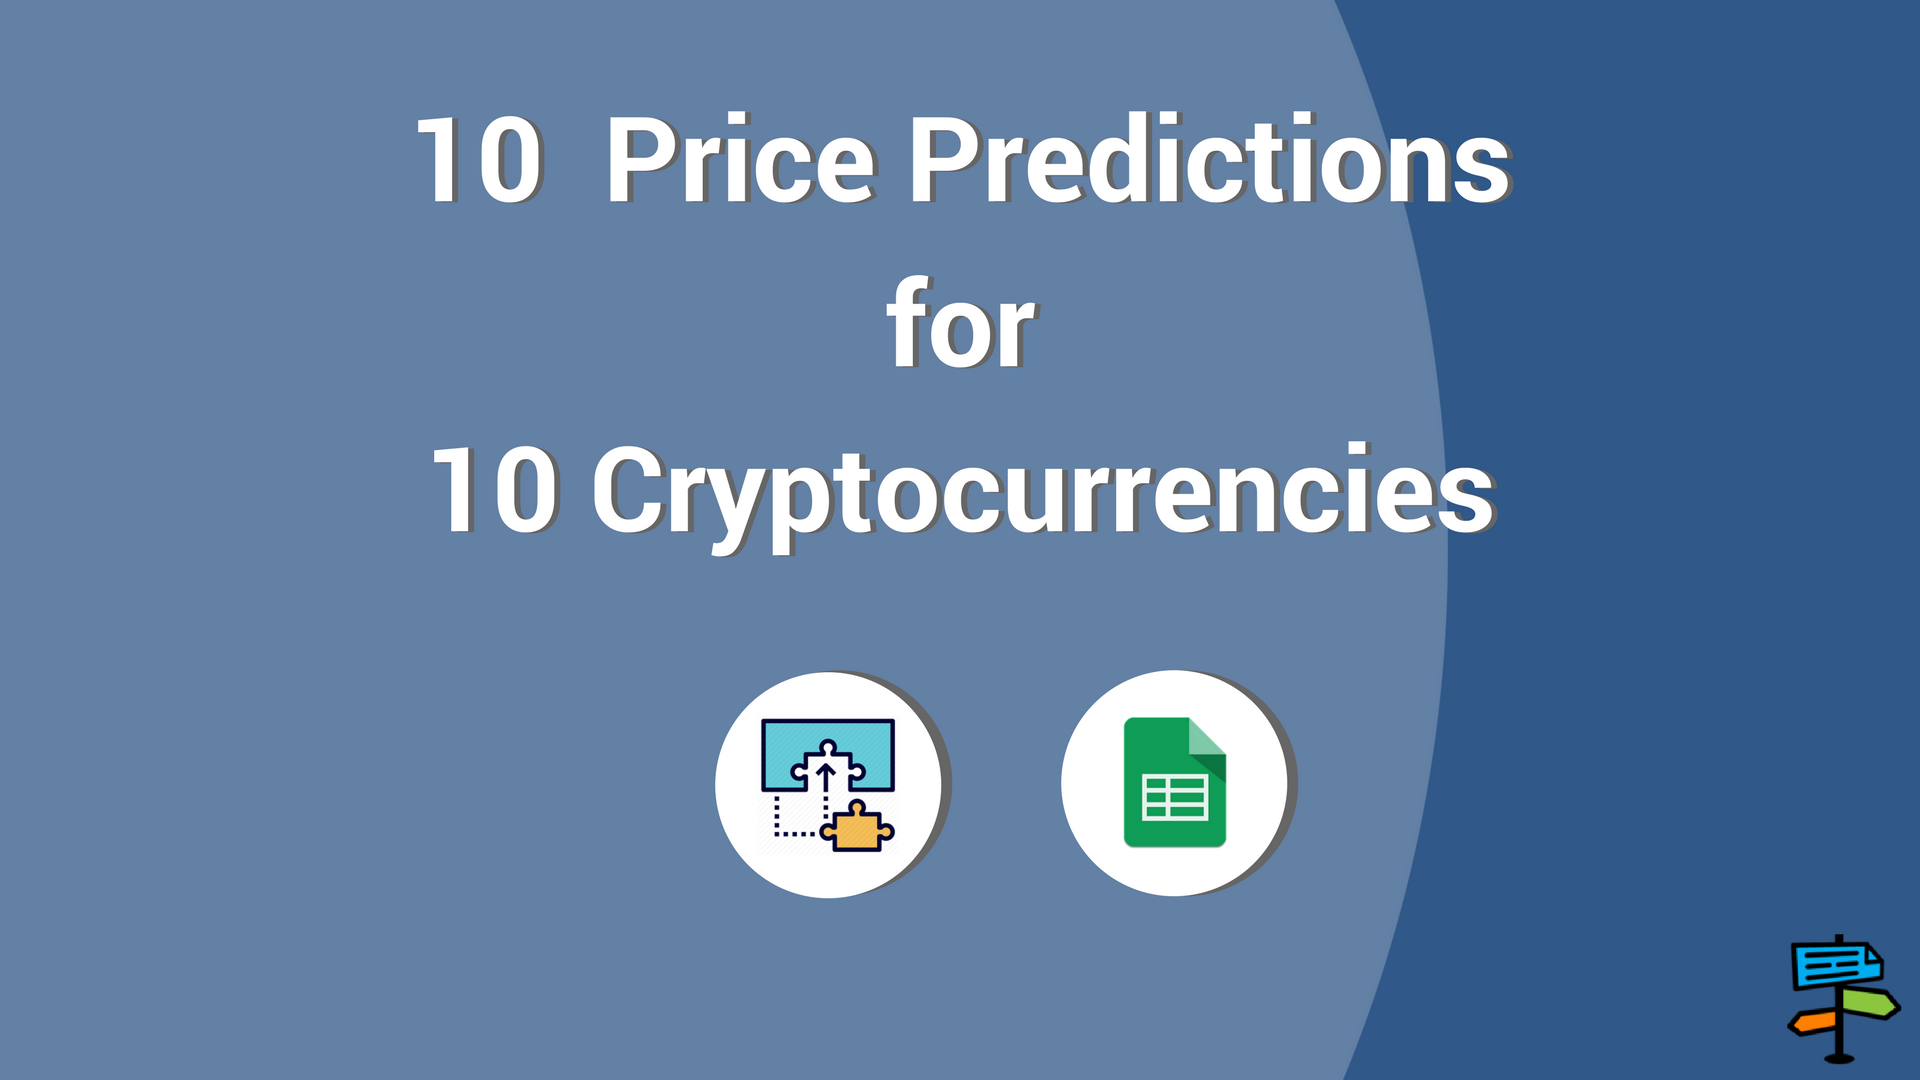 What’s in Store for the Top 10 Cryptocurrencies in 2019